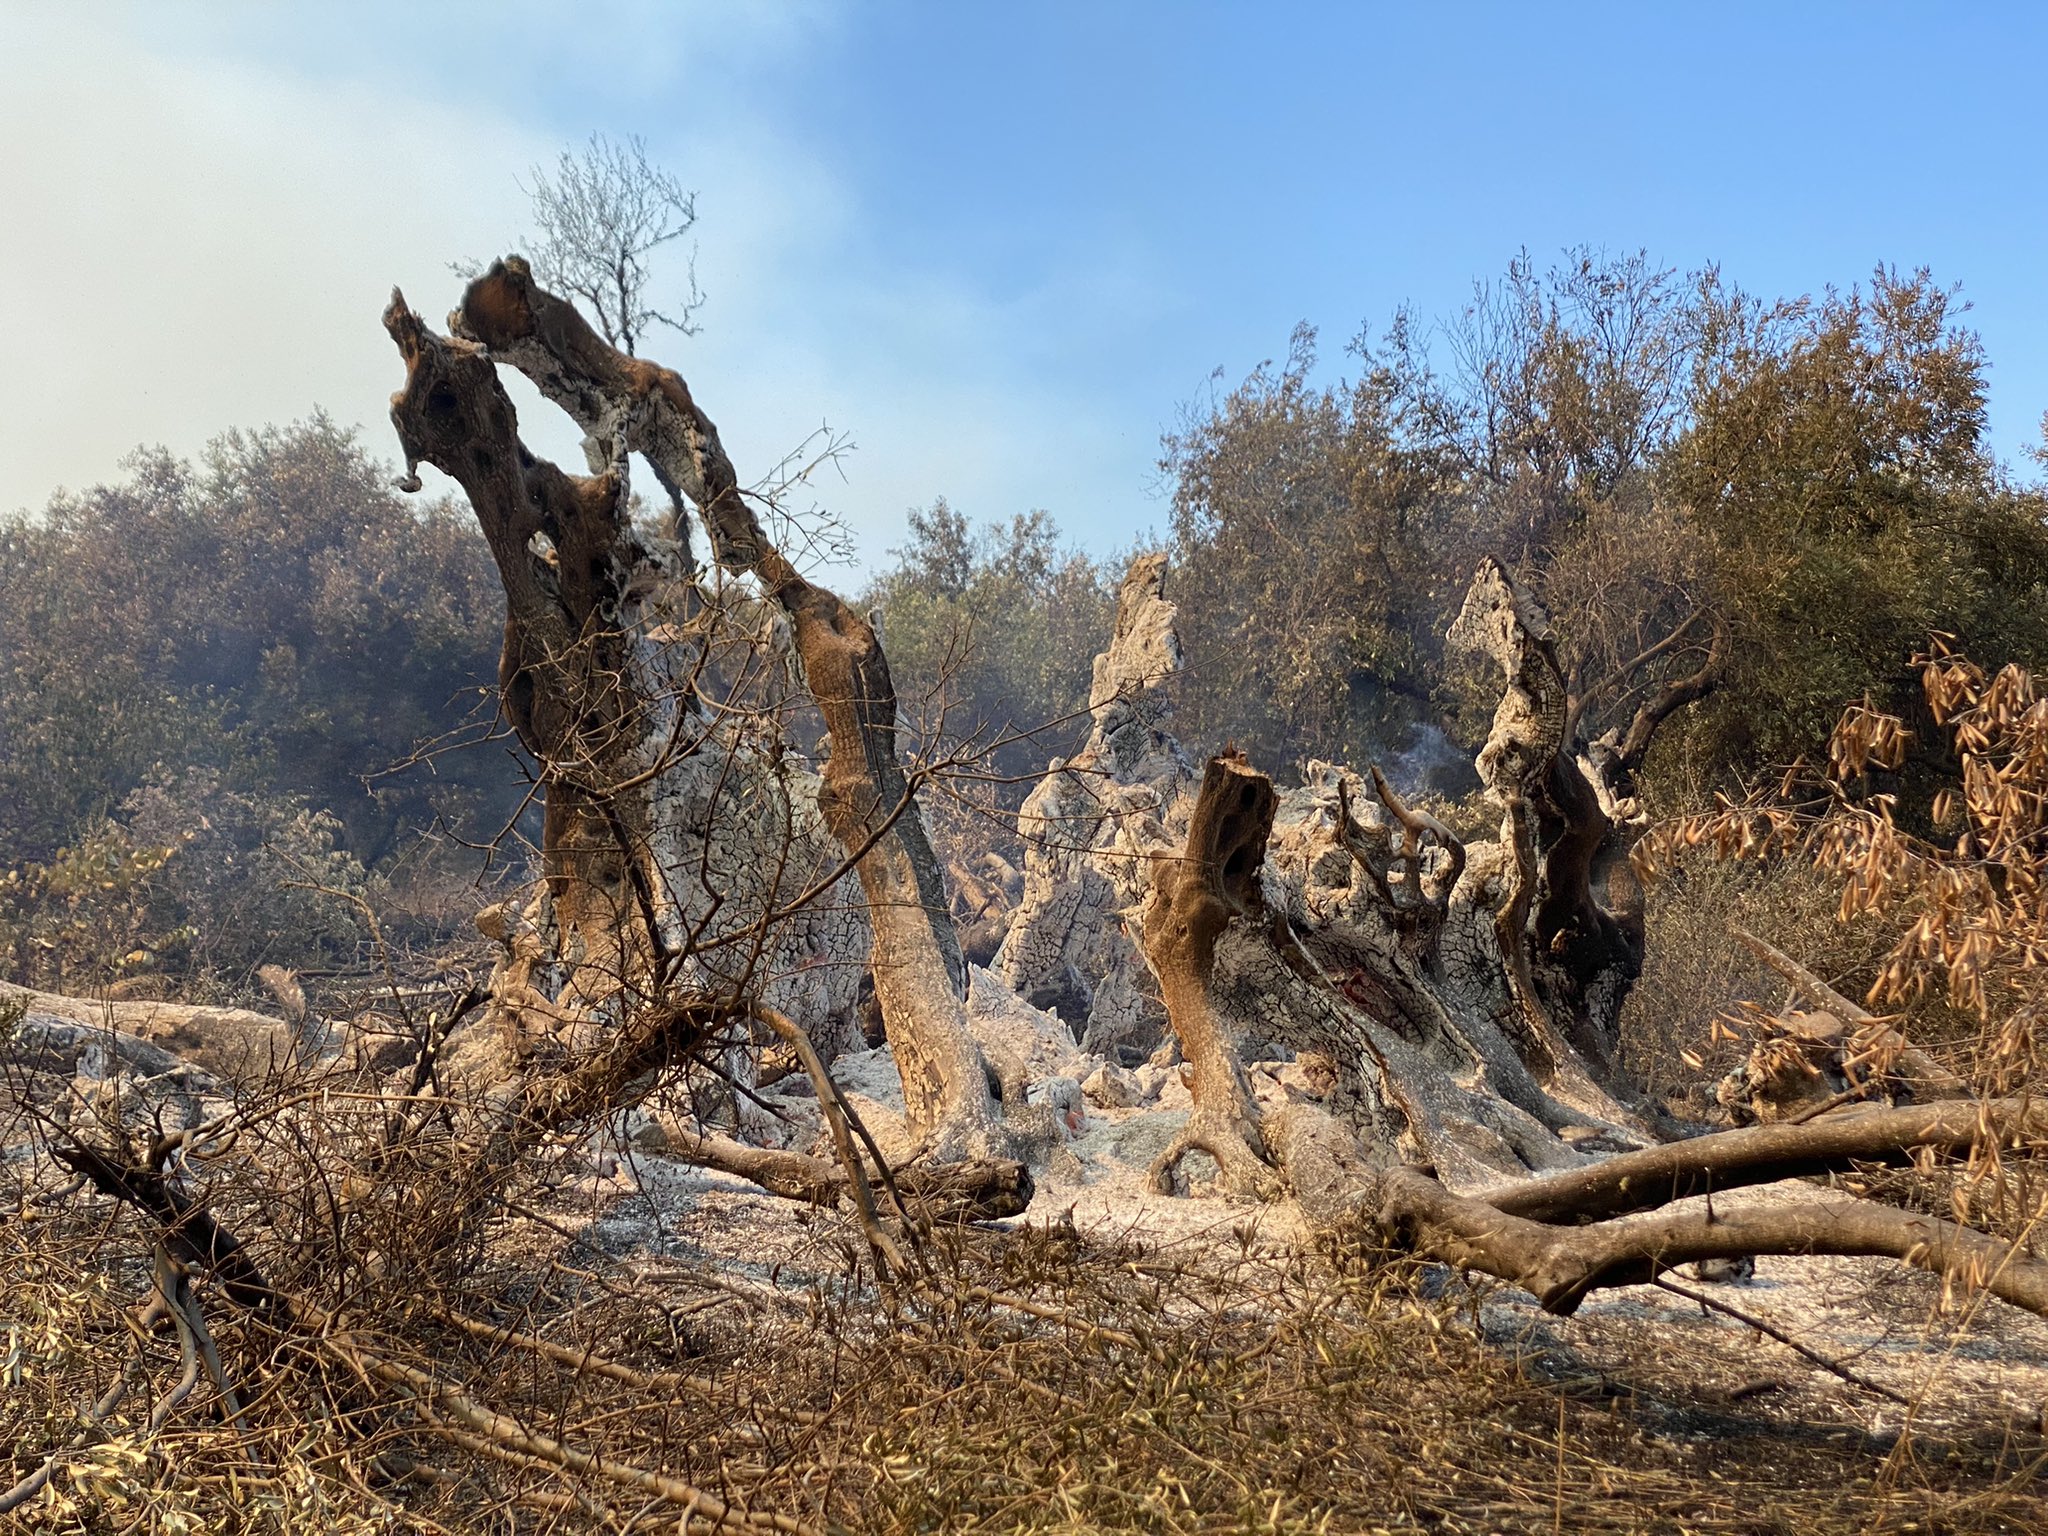 In Greece, a forest fire destroyed an olive tree that was 2.5 thousand years old